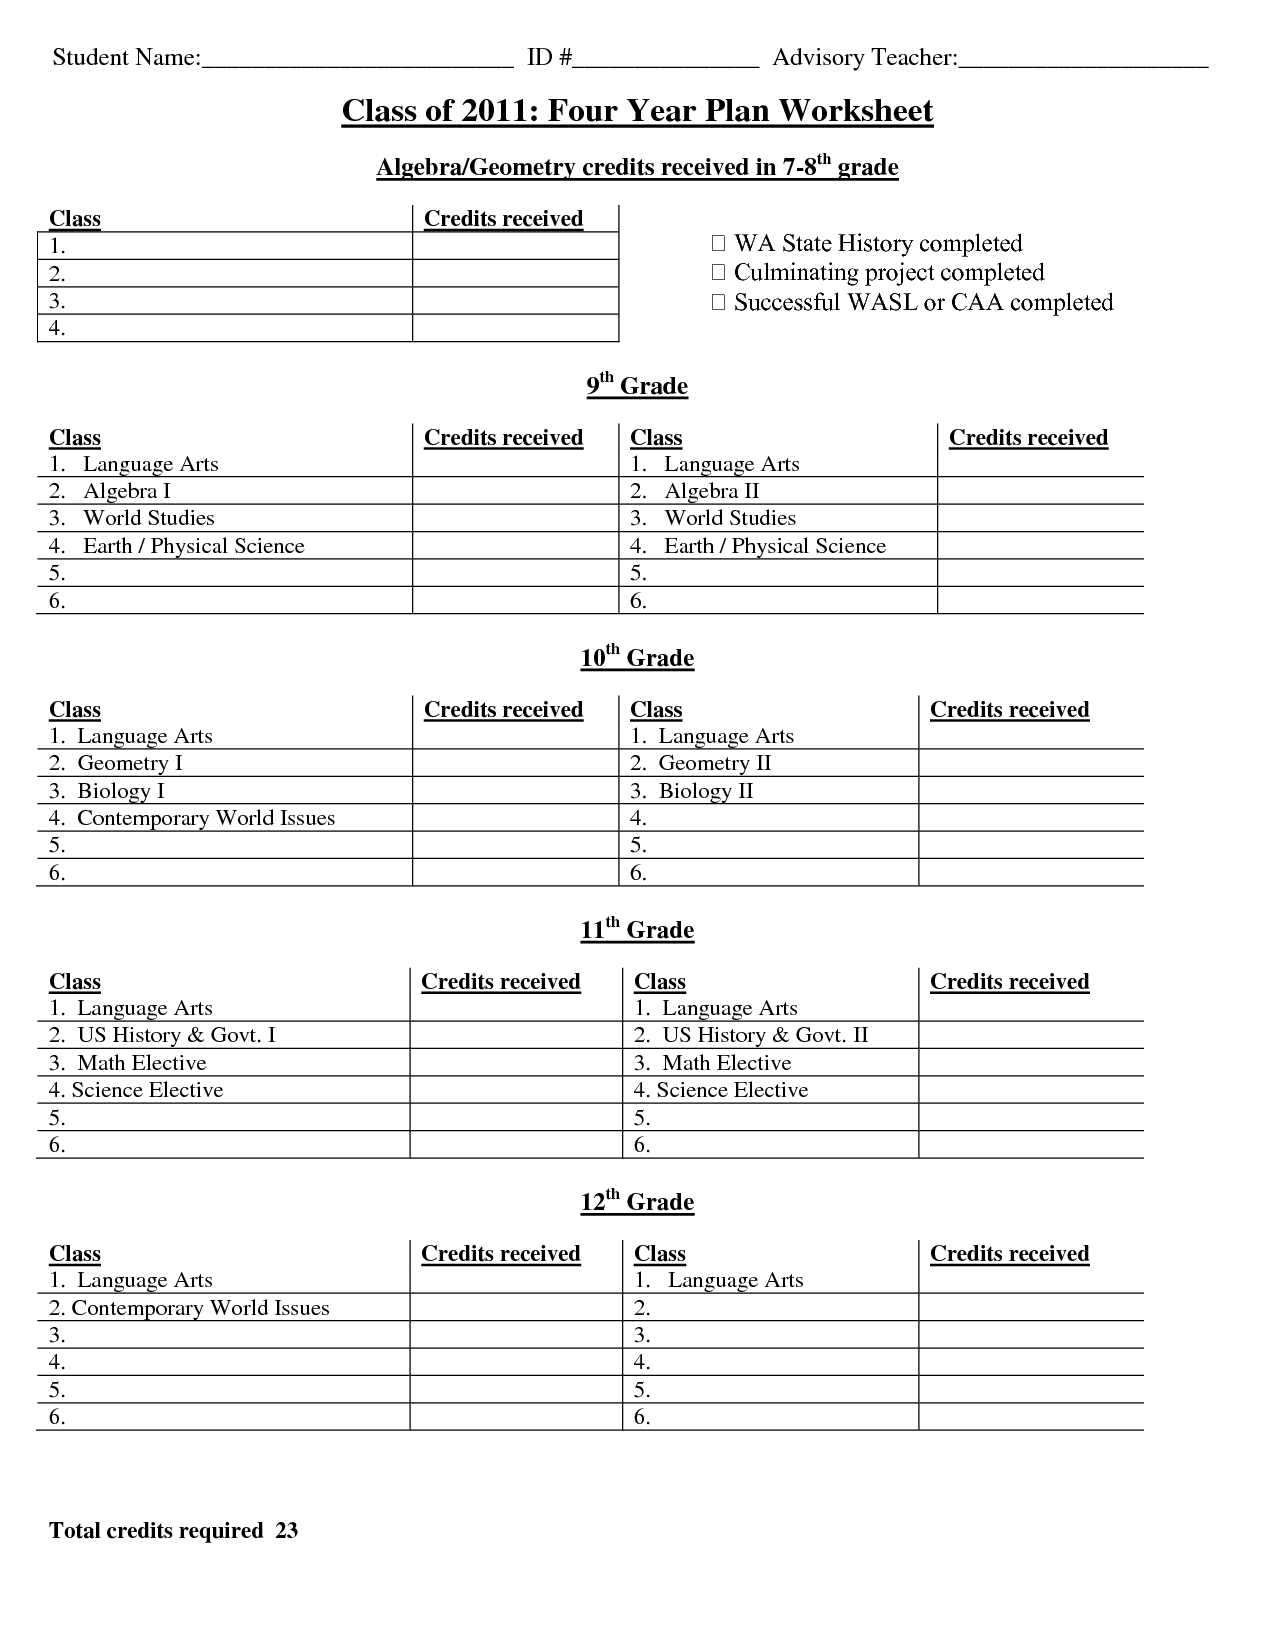 Four-Year College Plan Worksheets Image